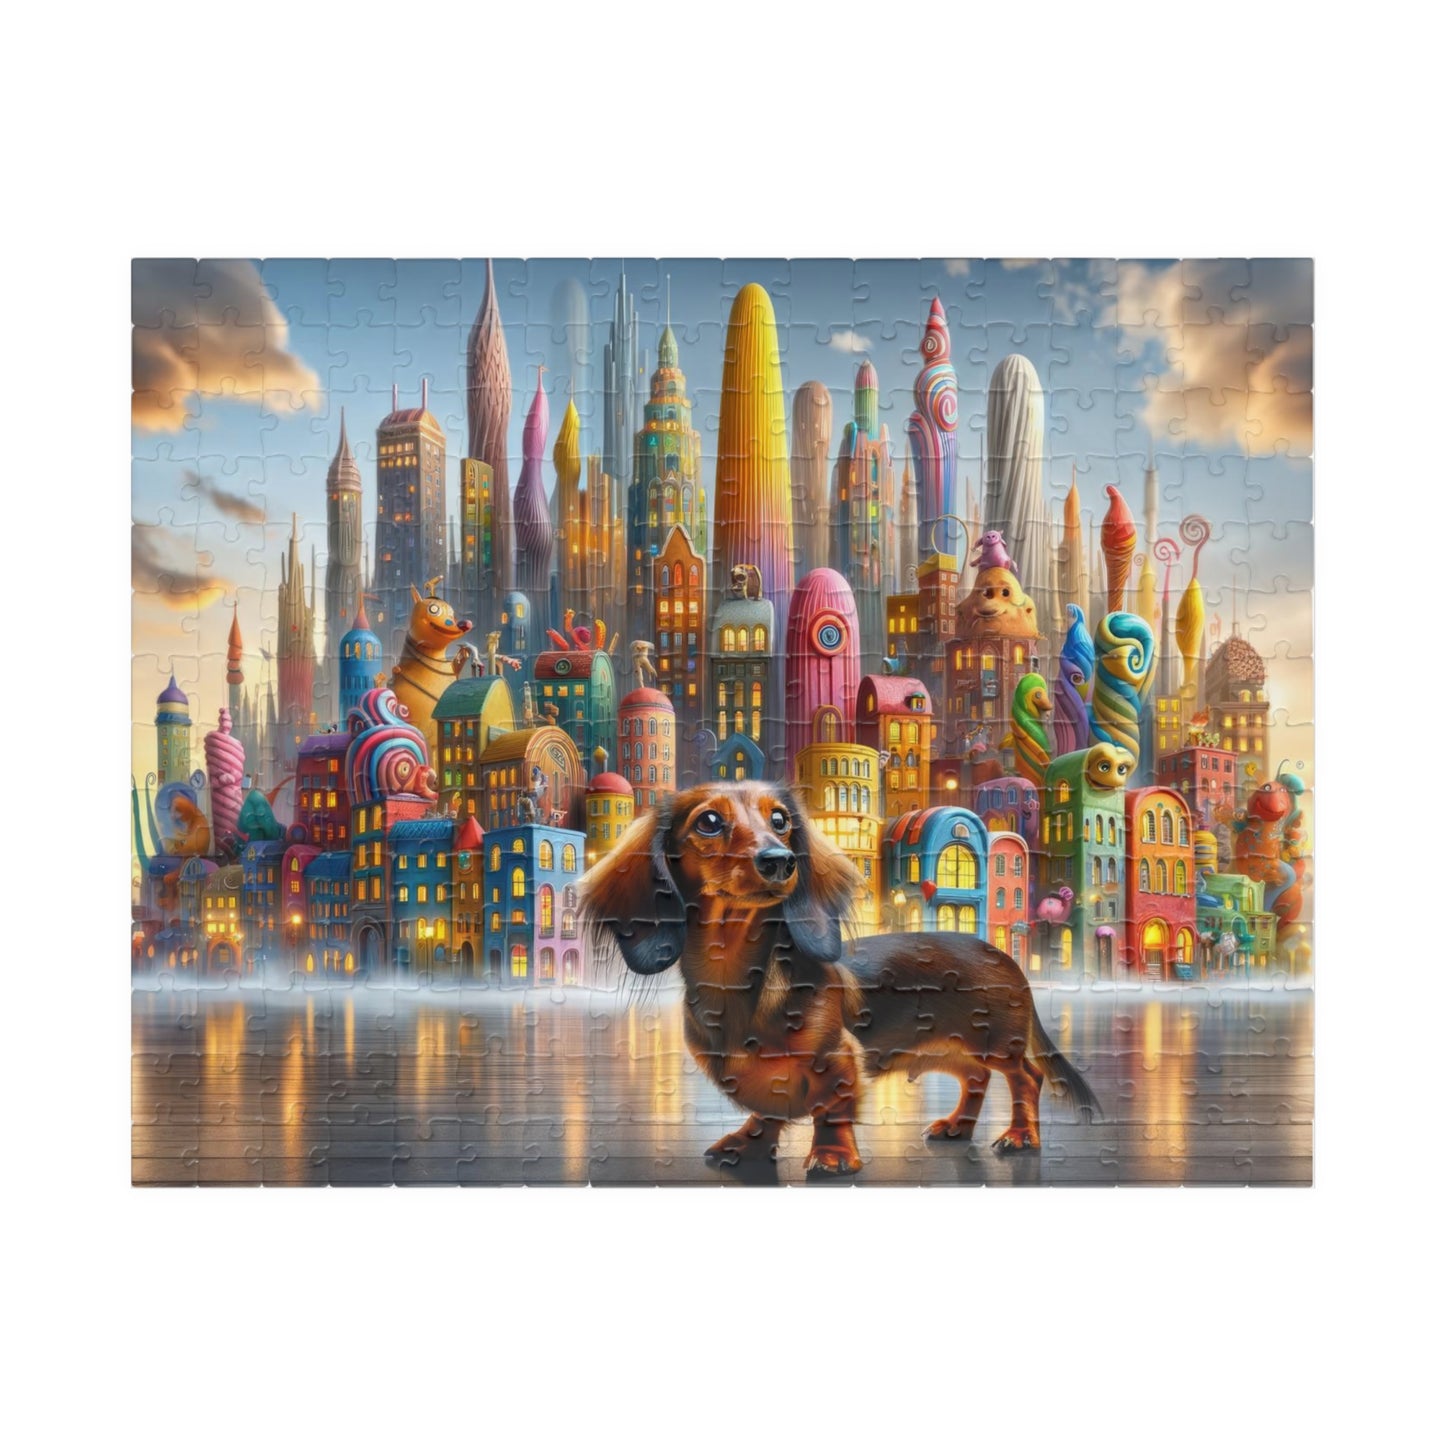 Dachshund Dream Cityscape Puzzle - Whimsical Skyline Jigsaw, Doxie Puzzle, Family-Friendly Game, Mindful Activity, 110, 252, 520, 1014-piece